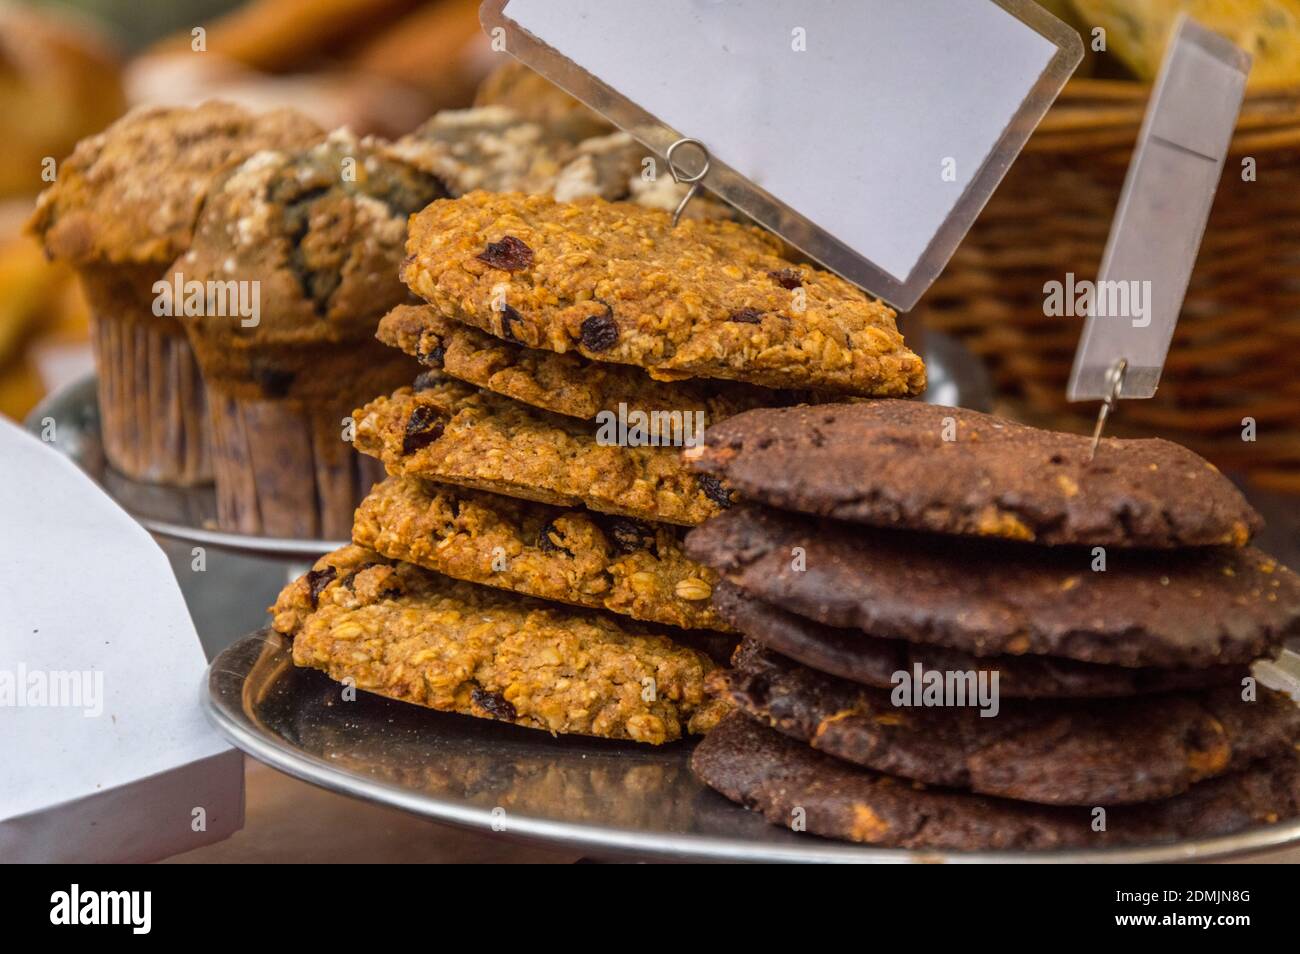 Close-up Of Cookies On Table Stock Photo